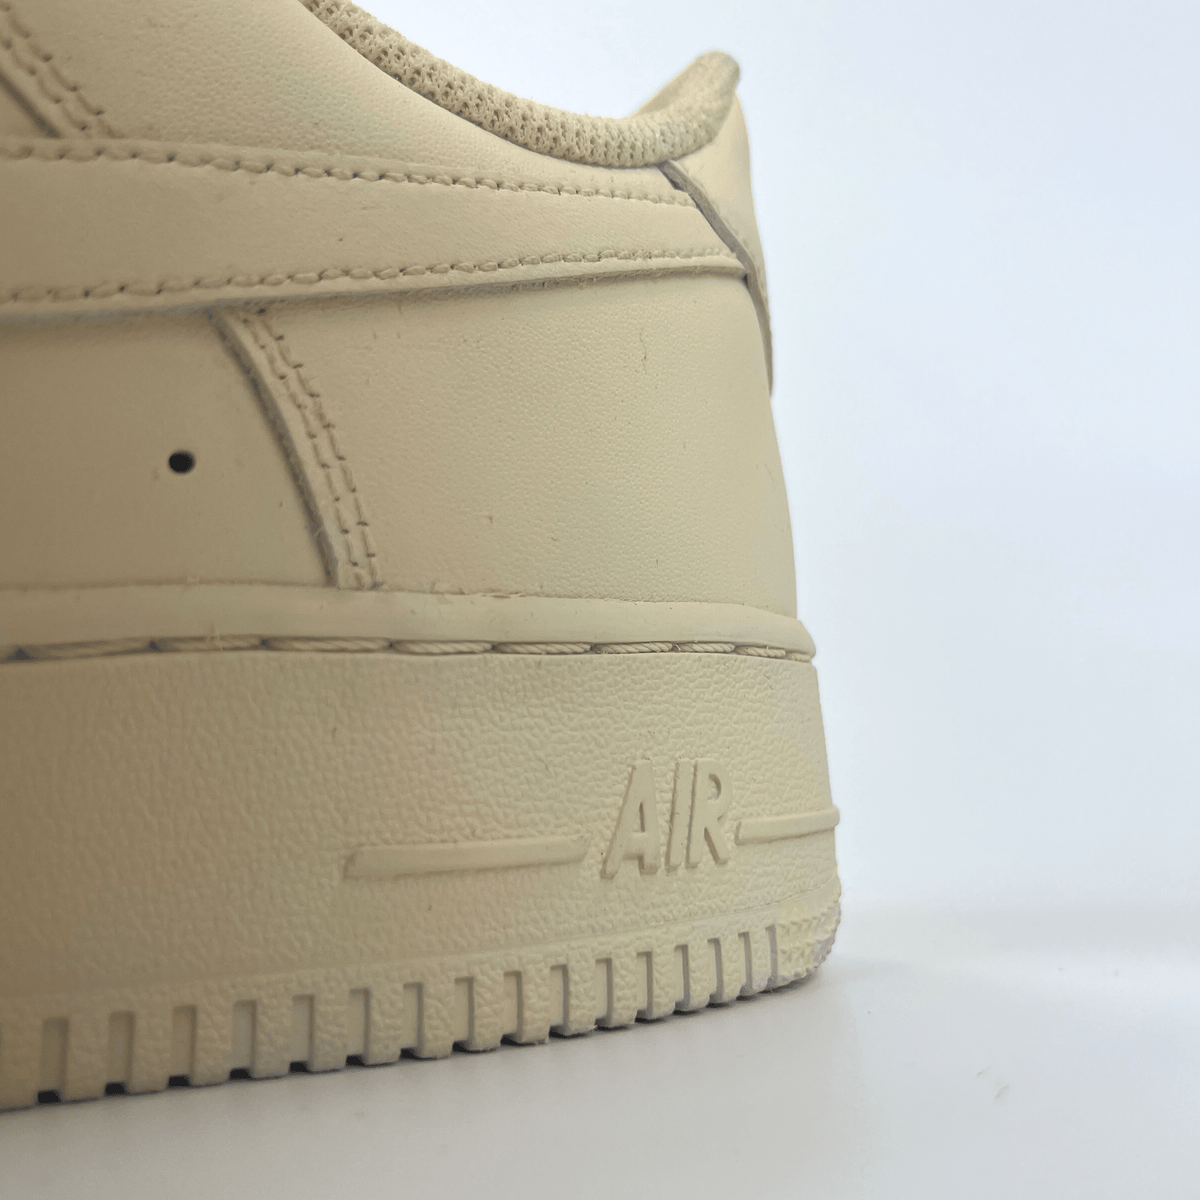 Rope Air Force 1 - CREAM 2.0 - No Sauce The Plug